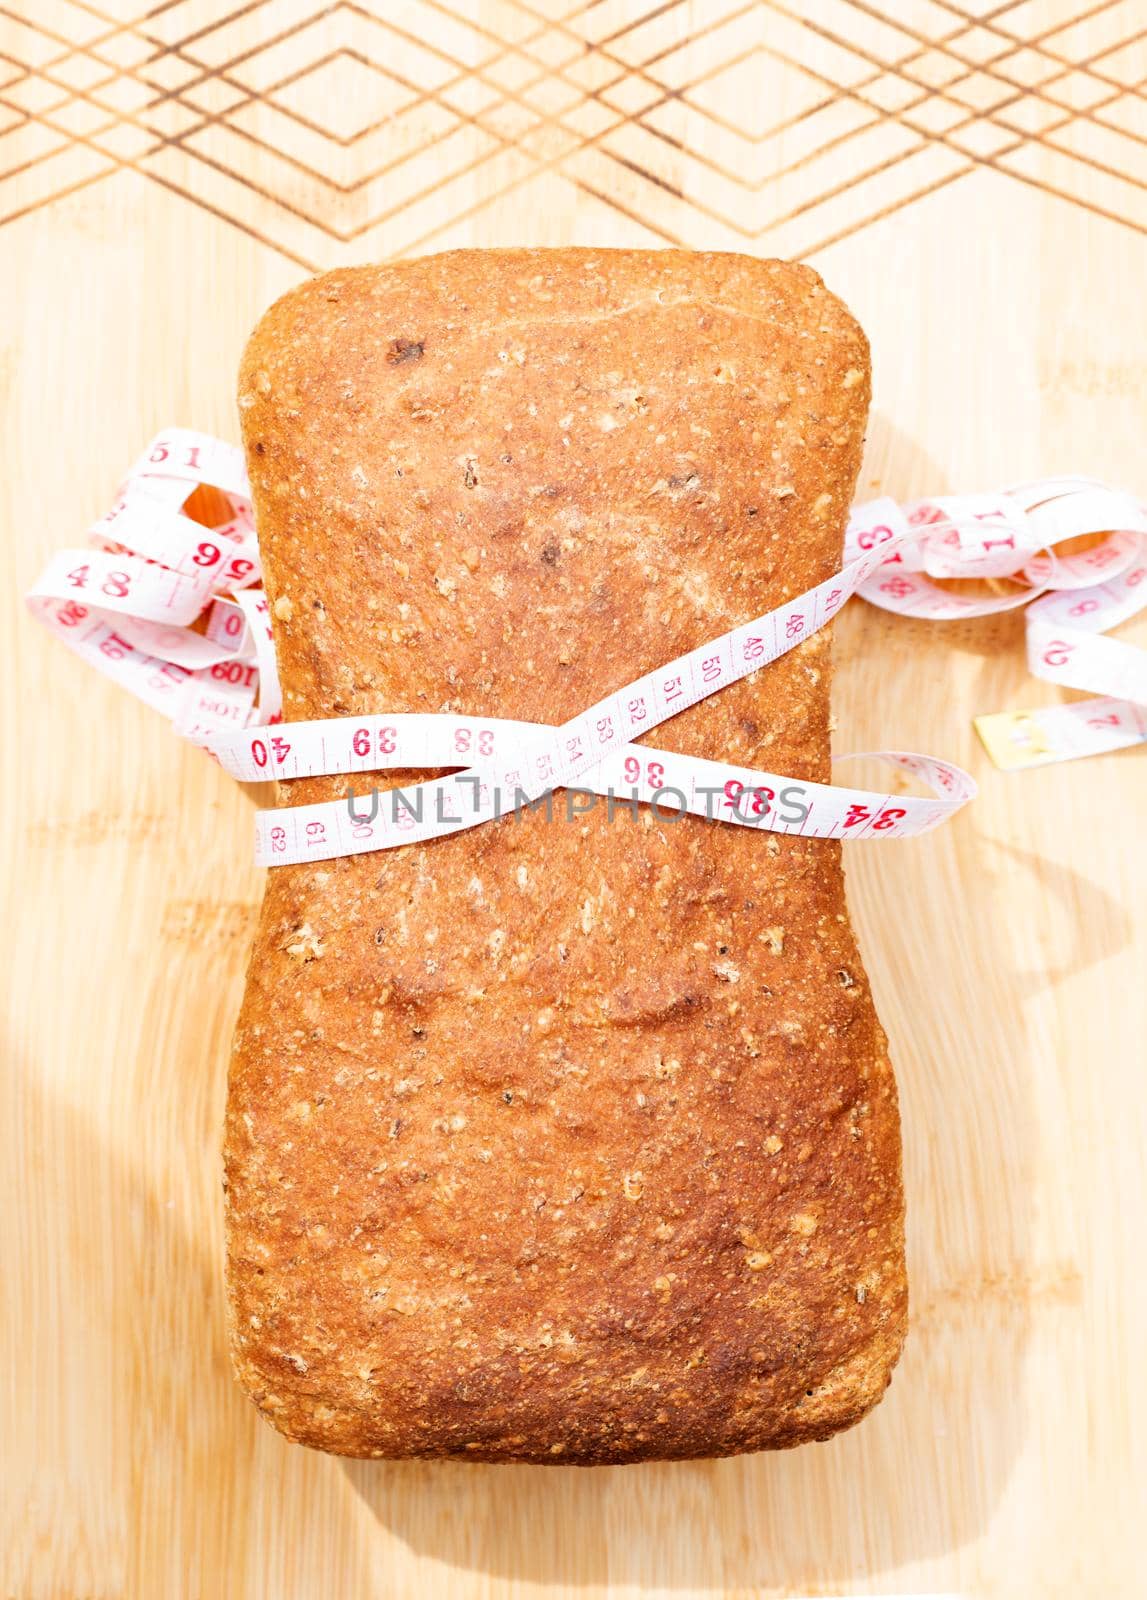 whole grain bread wrapped in a measuring tape on a board